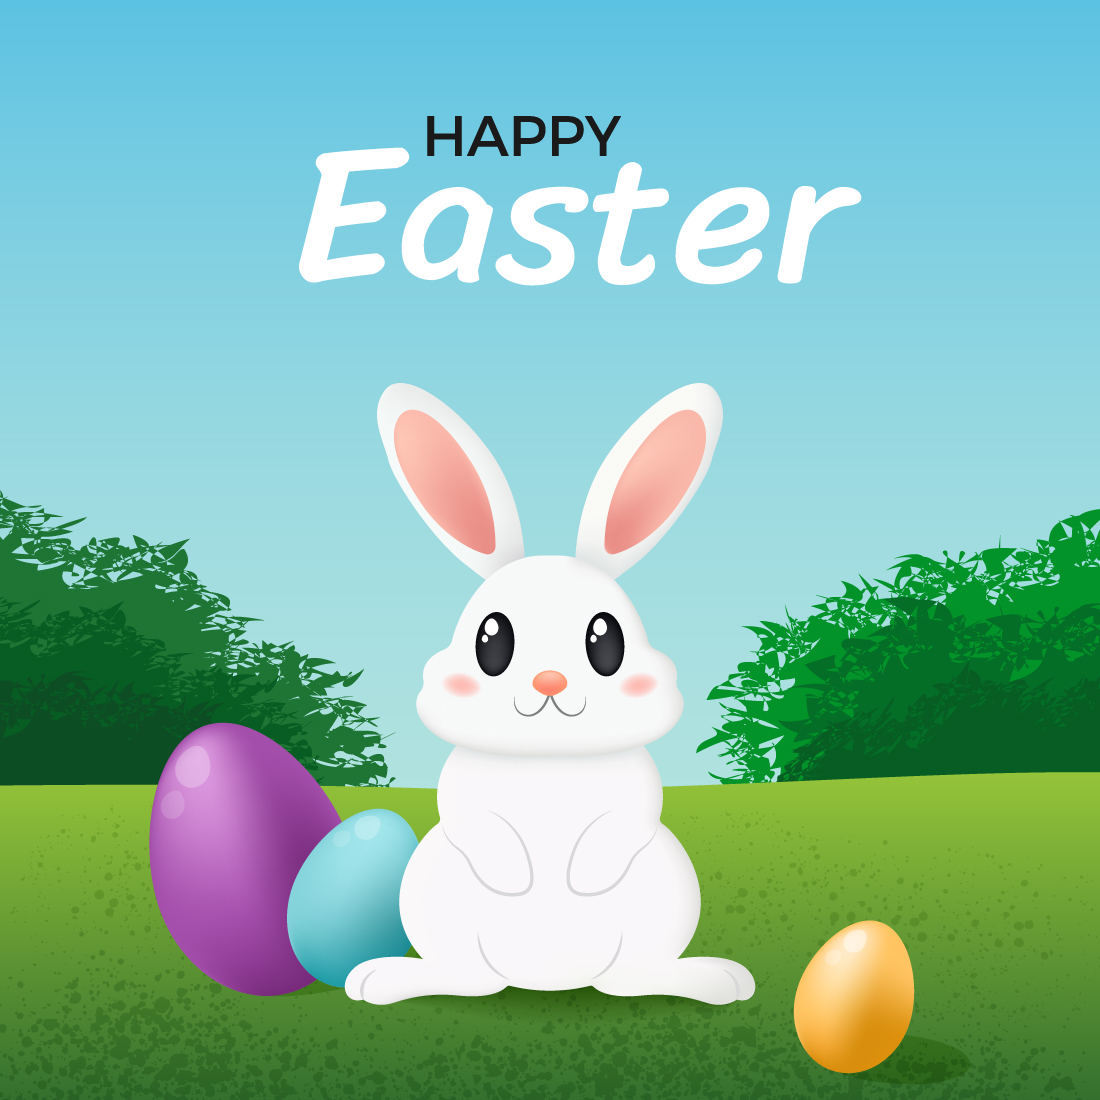 Set of Happy Easter banners with cute white bunny and eggs Vector illustration with cartoon rabbit on green field cover image.